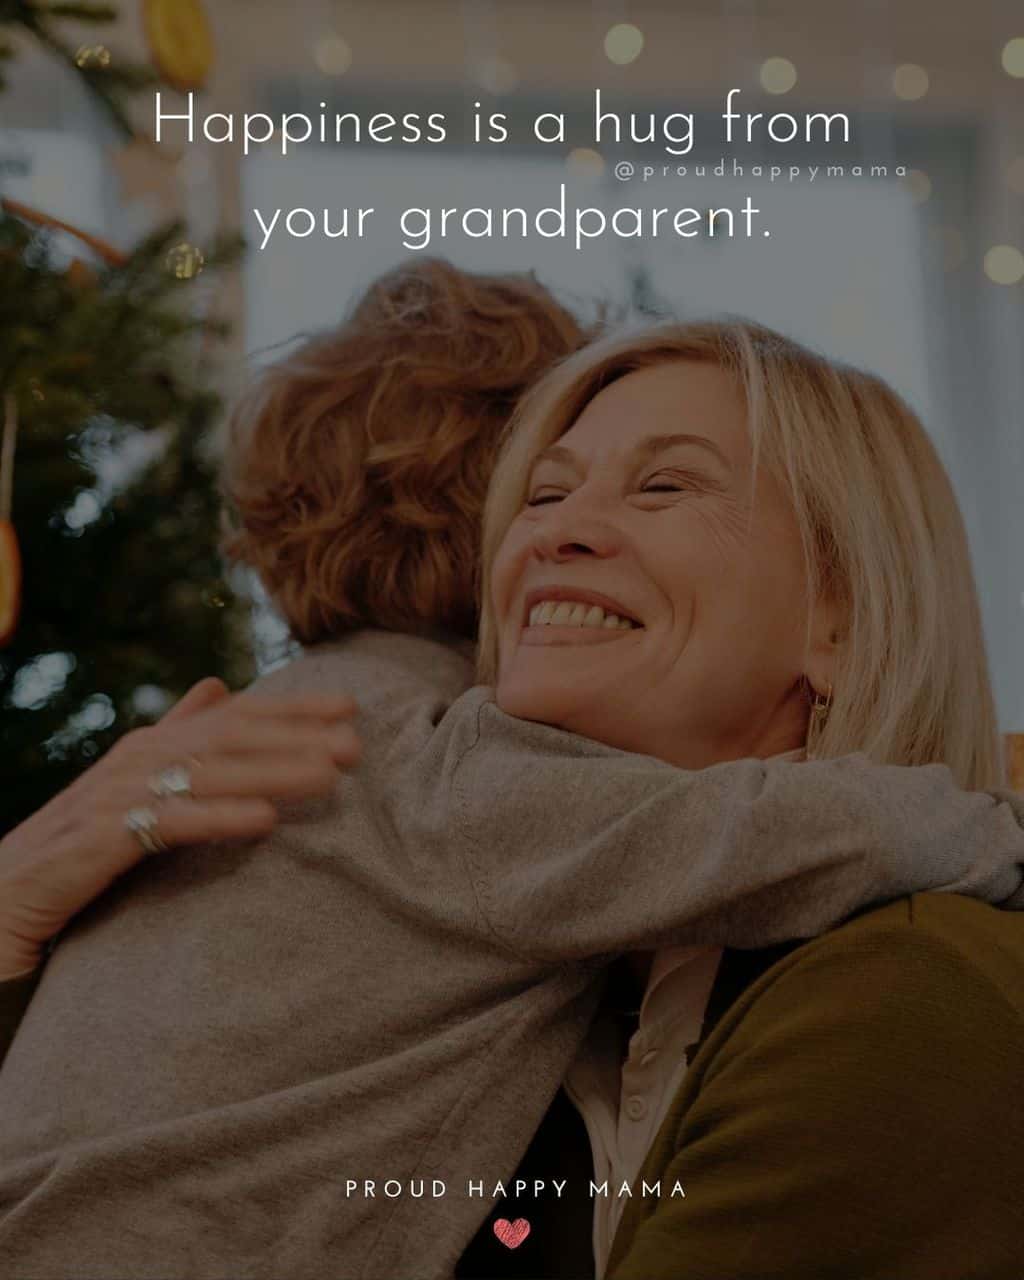 Grandparent Quotes – Happiness is a hug from your grandparent.